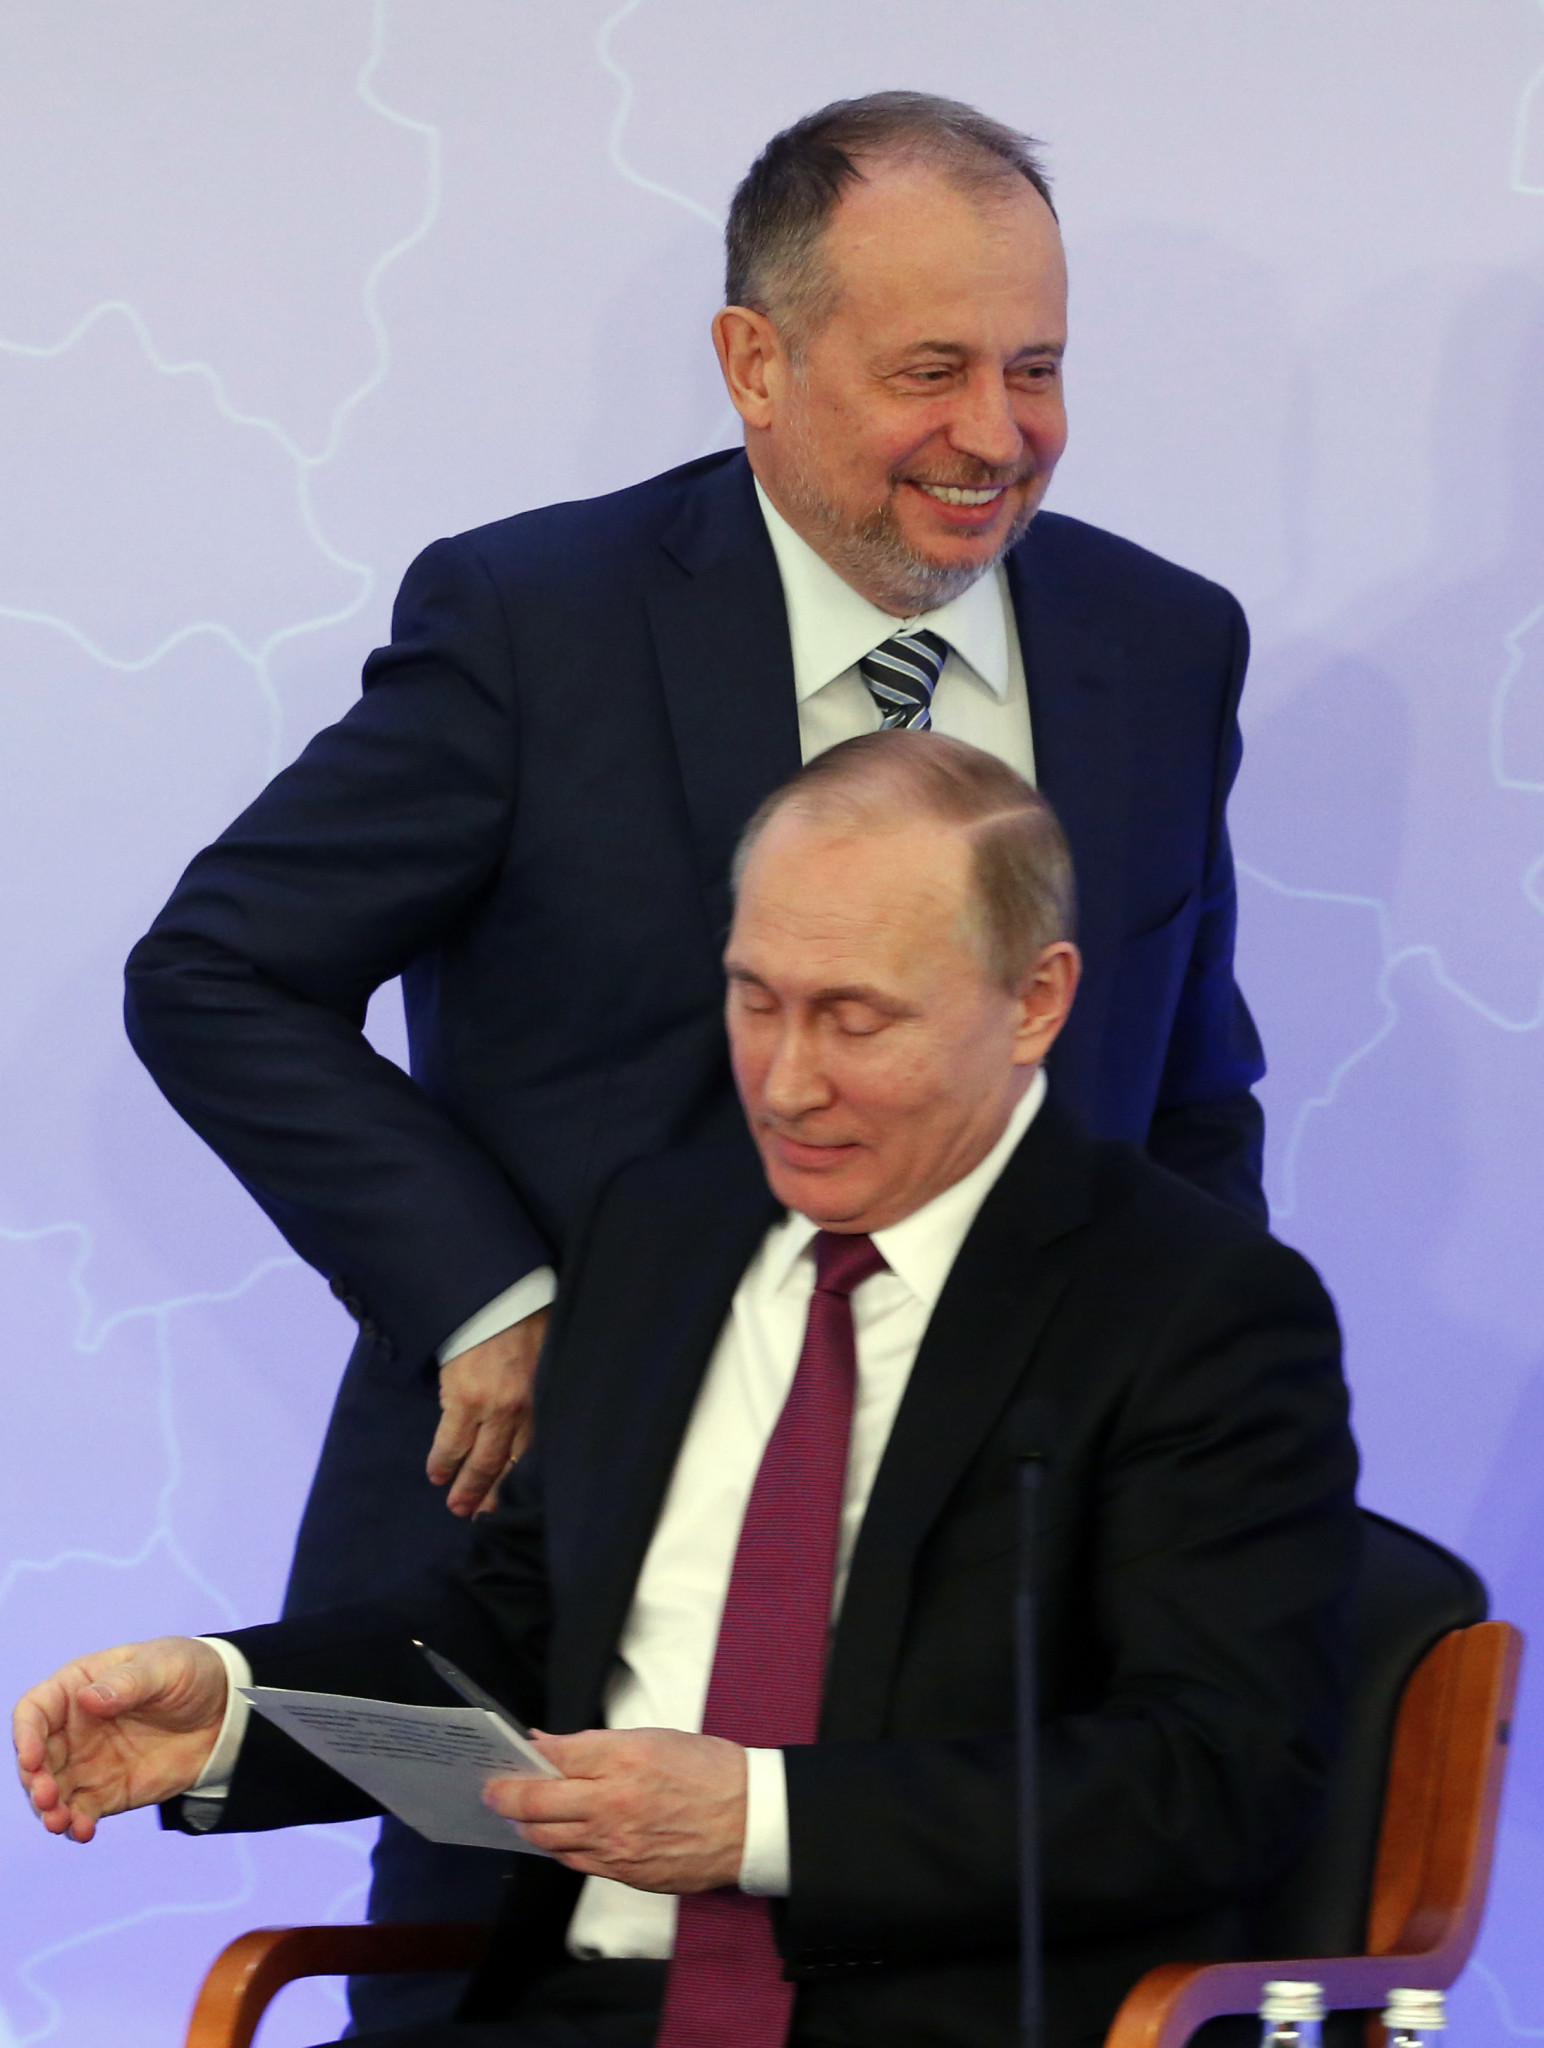 Russian tycoon Vladimir Lisin, seen here with Vladimir Putin, is favourite to succeed Olegario Vázquez Raña and become the first new ISSF President since 1980 ©Getty Images